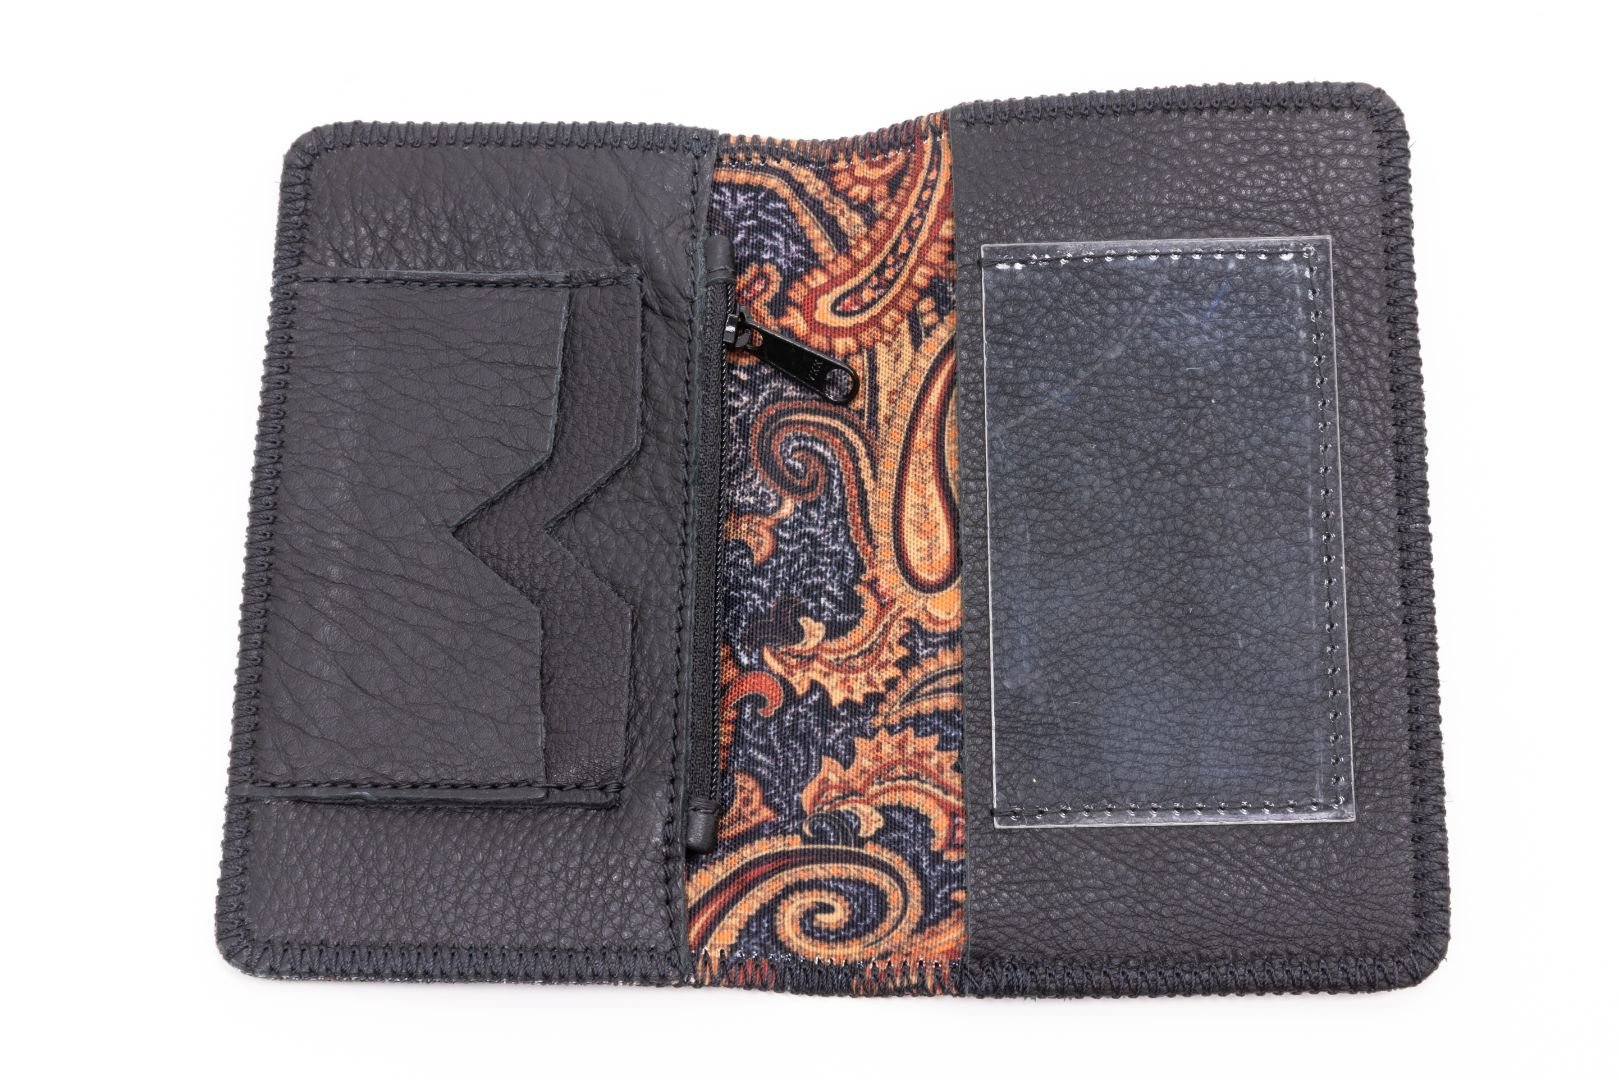 Black Travel Wallet - Lyons Leather Co.